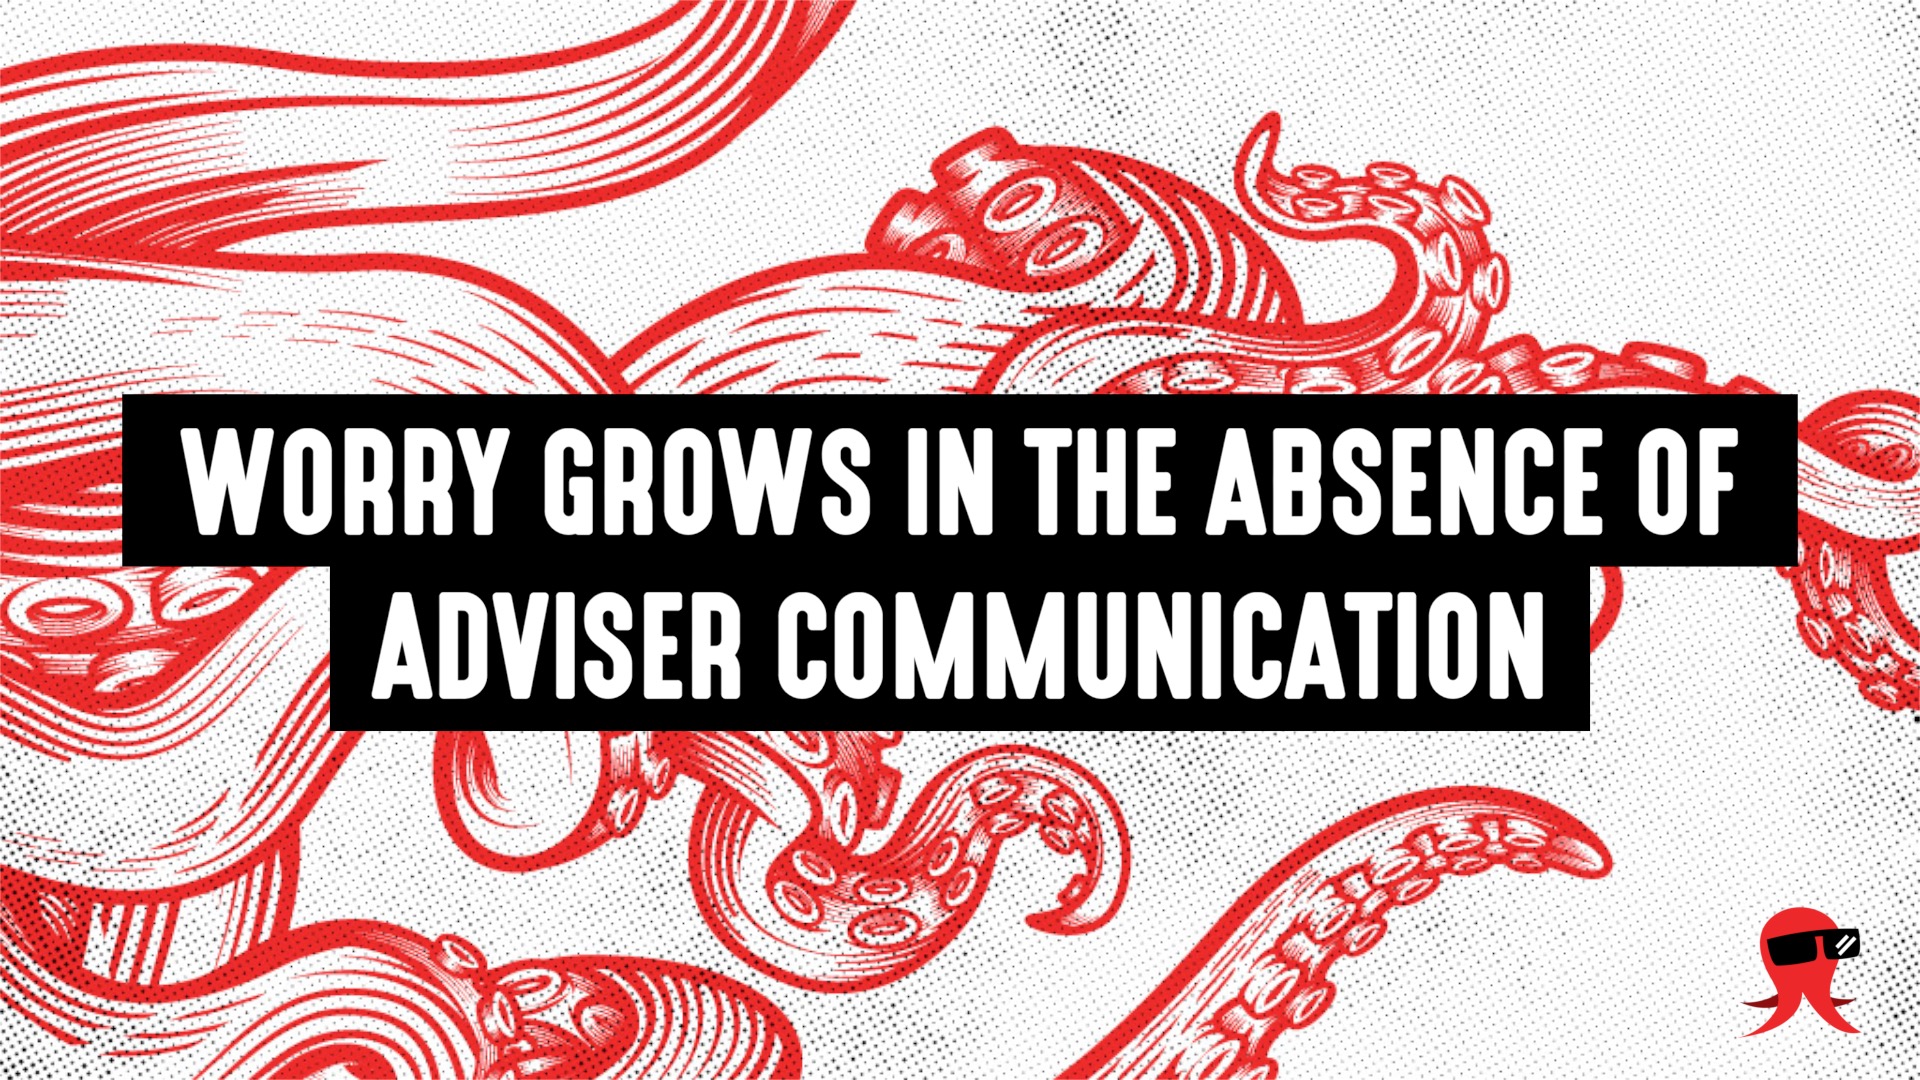 Worry Grows In the Absence of Adviser Communication